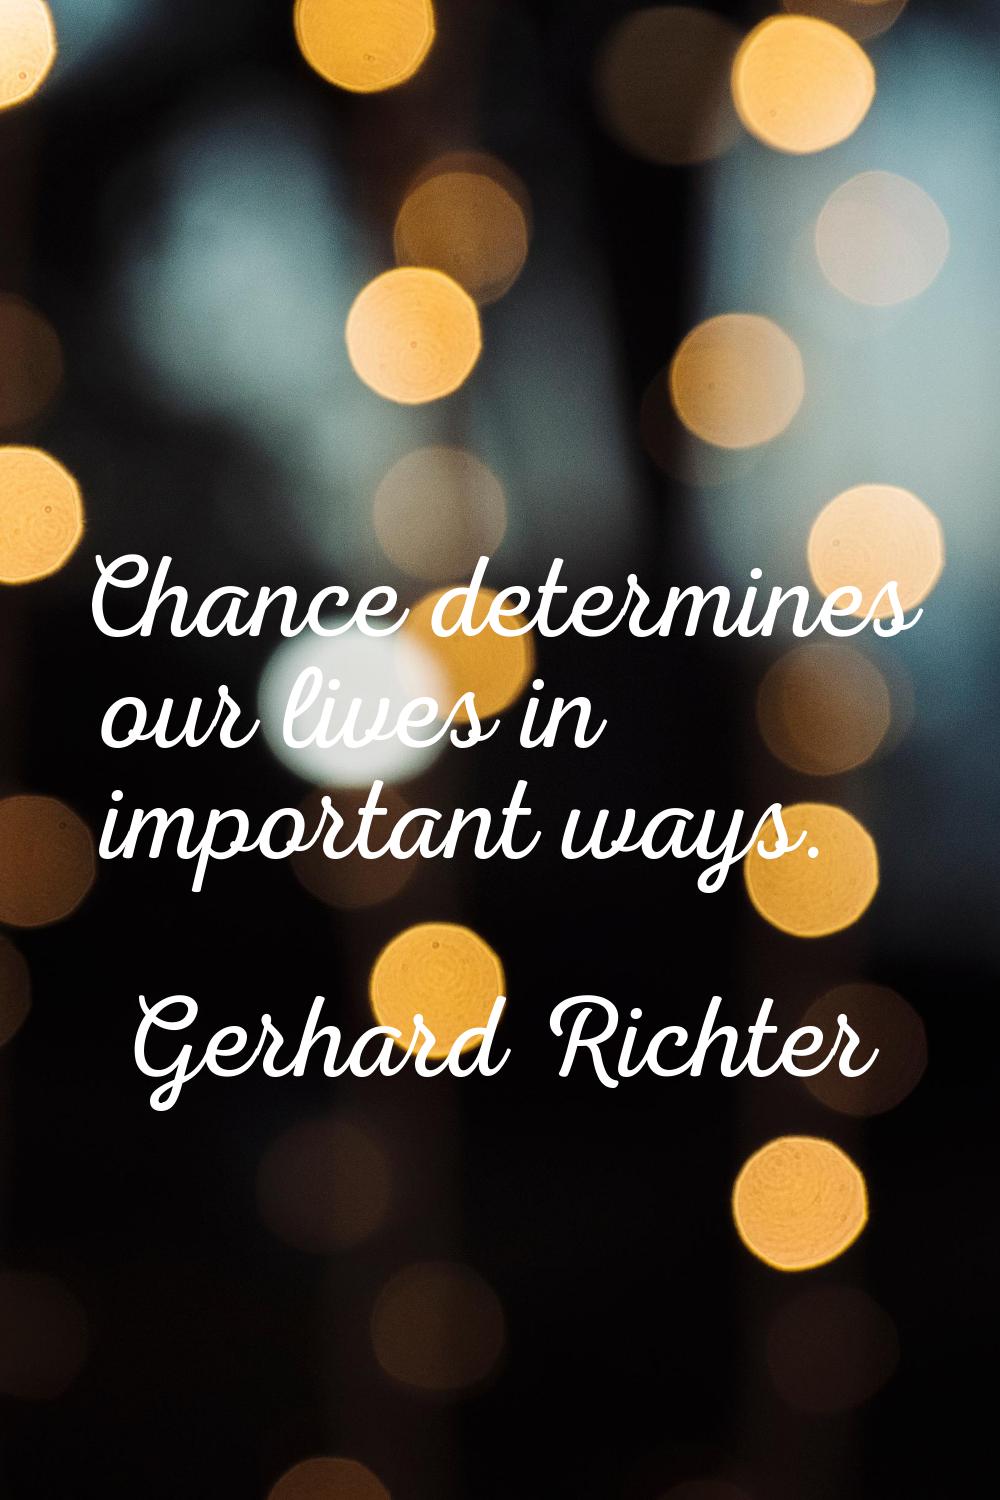 Chance determines our lives in important ways.